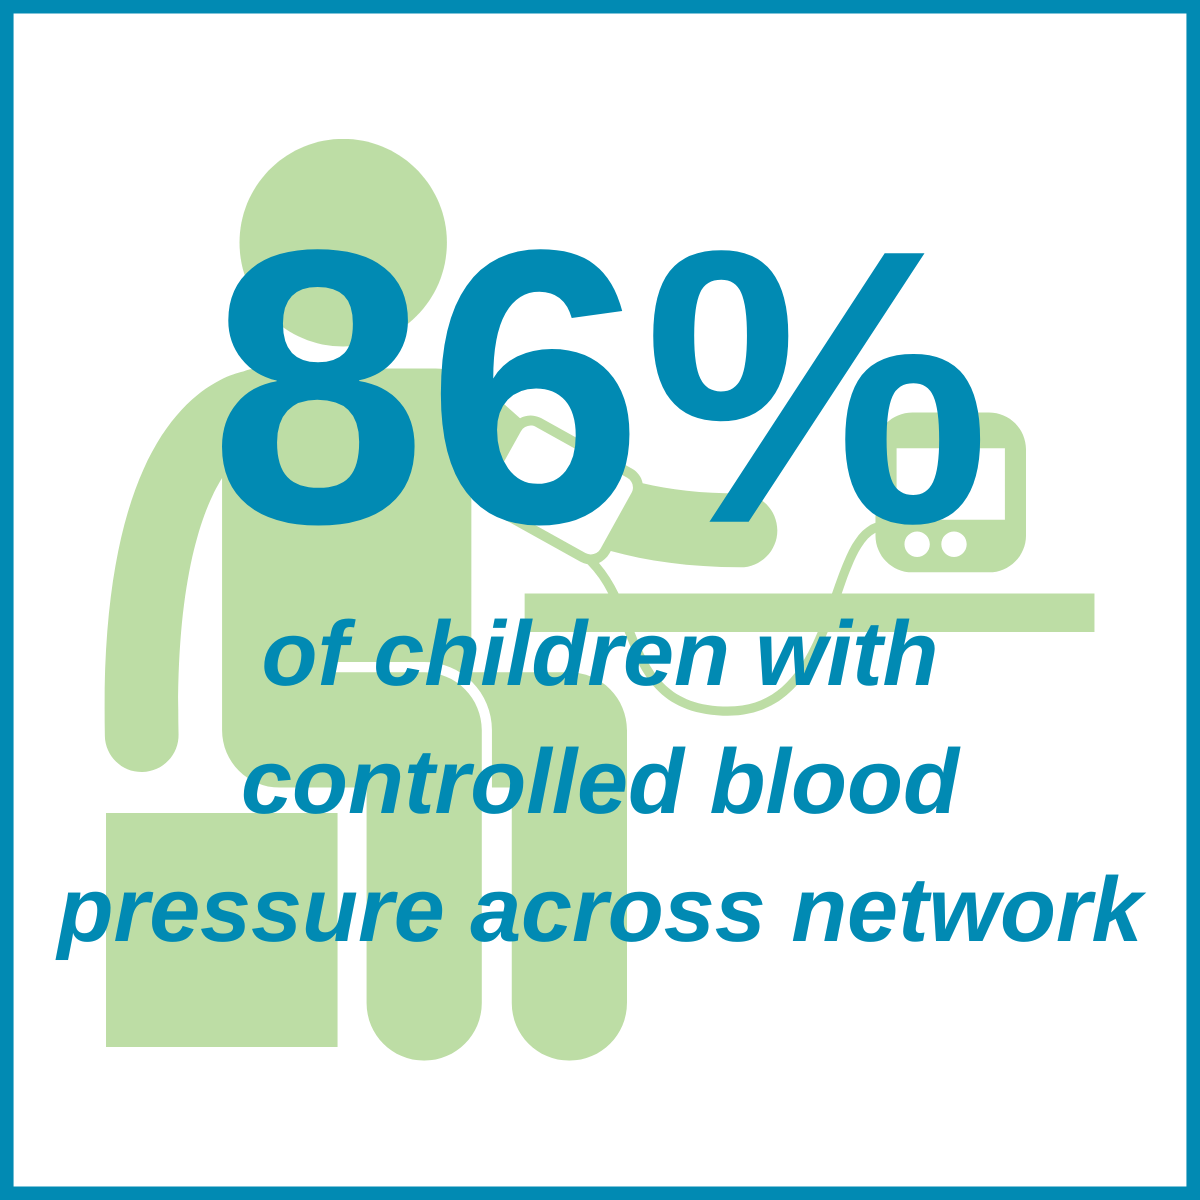 86% of children with controlled blood pressure across network.